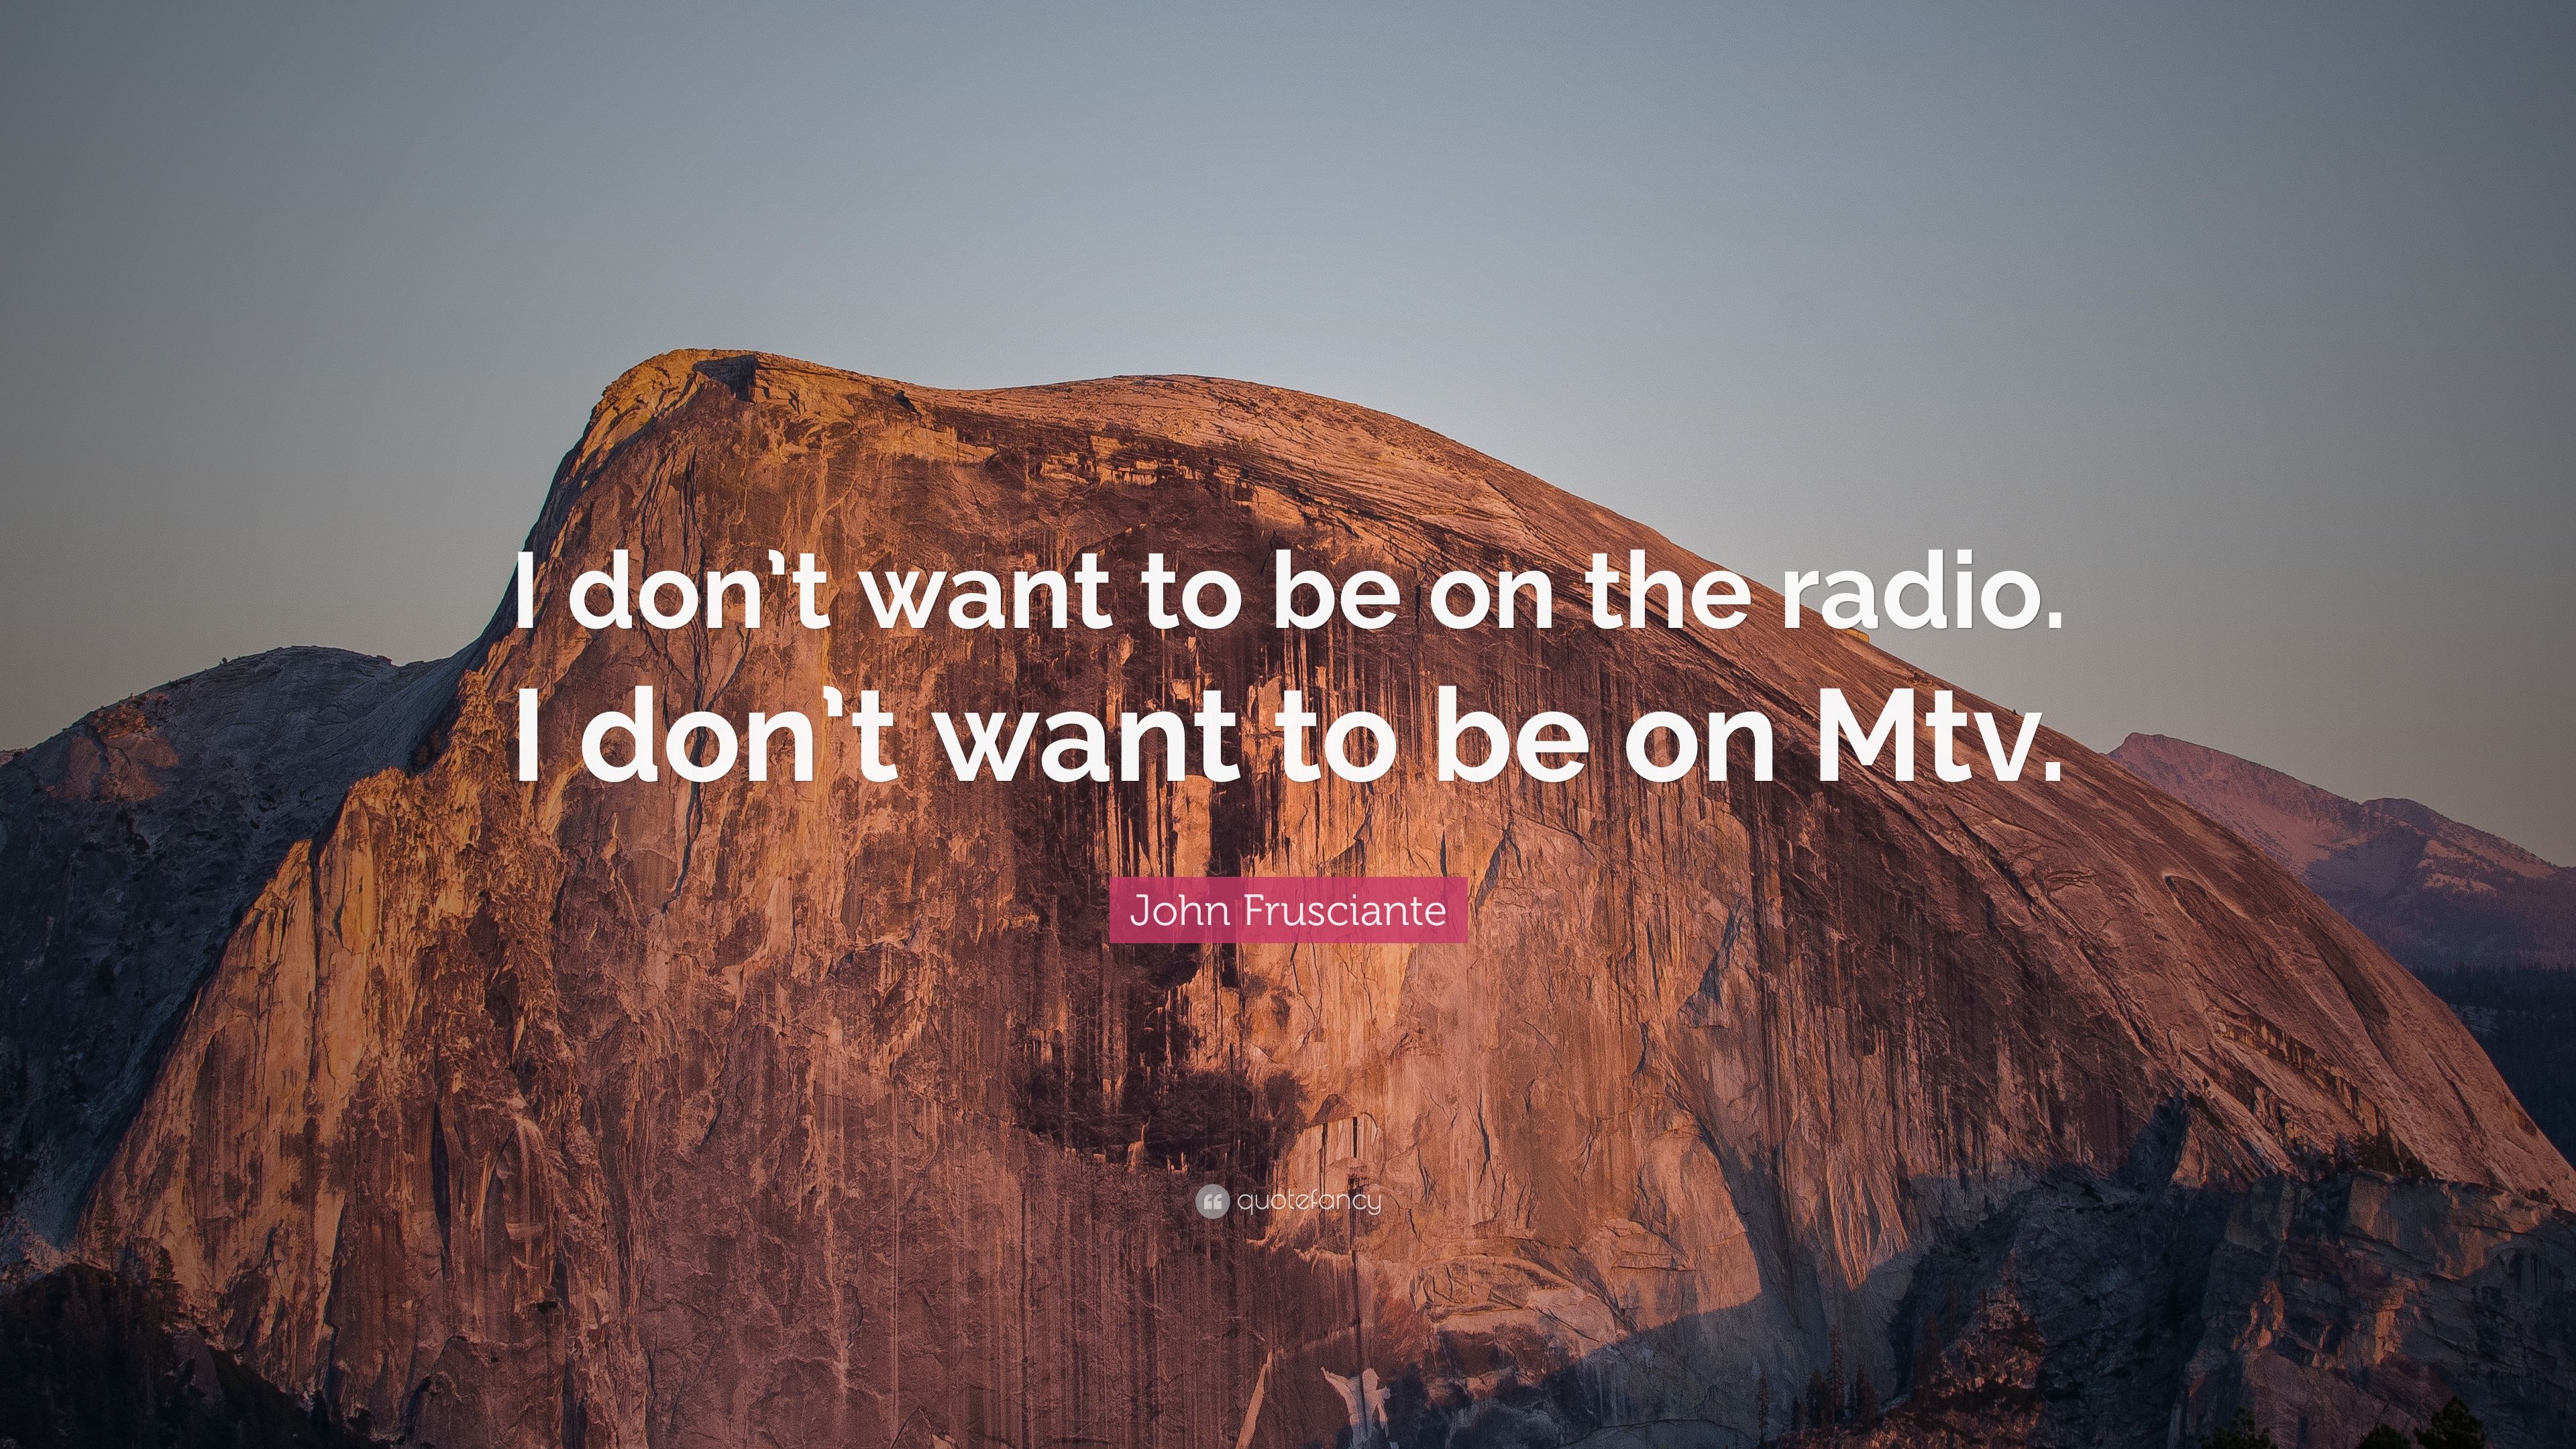 John Frusciante Quote: “I don't want to be on the radio. I don't